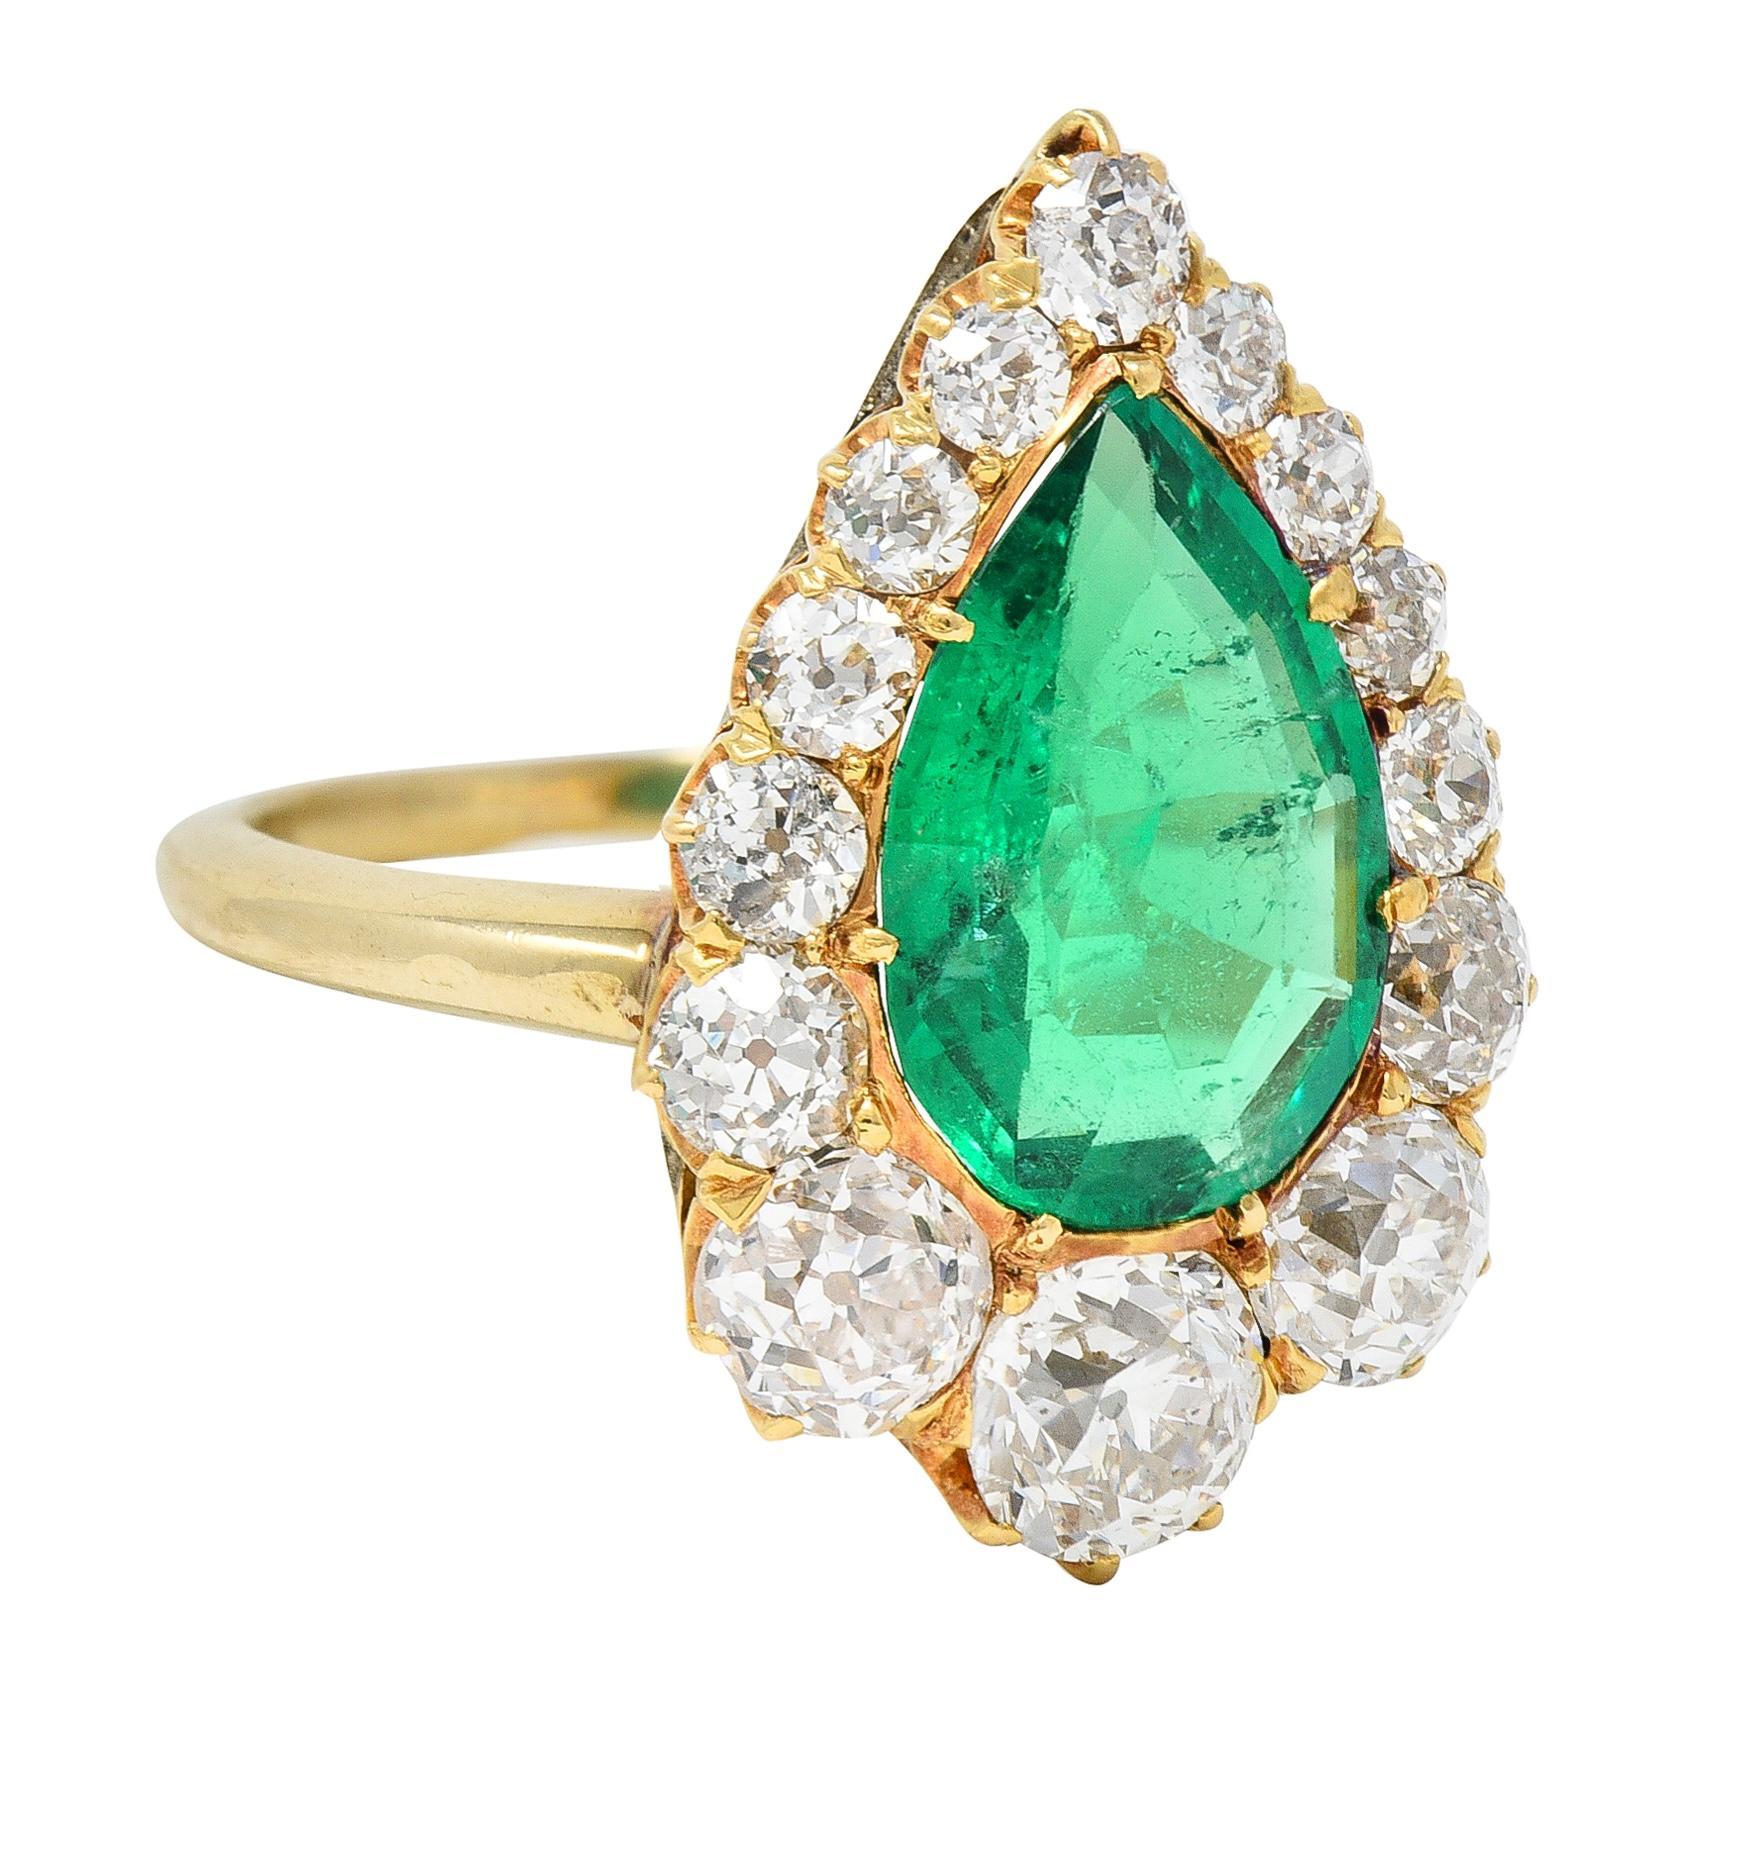 Centering a pear-shaped step-cut emerald weighing 2.41 carats - transparent medium green in color 
Natural Colombian in origin and displaying with minor traditional treatment (F2)
Prong set with a halo surround of graduated old mine and European cut